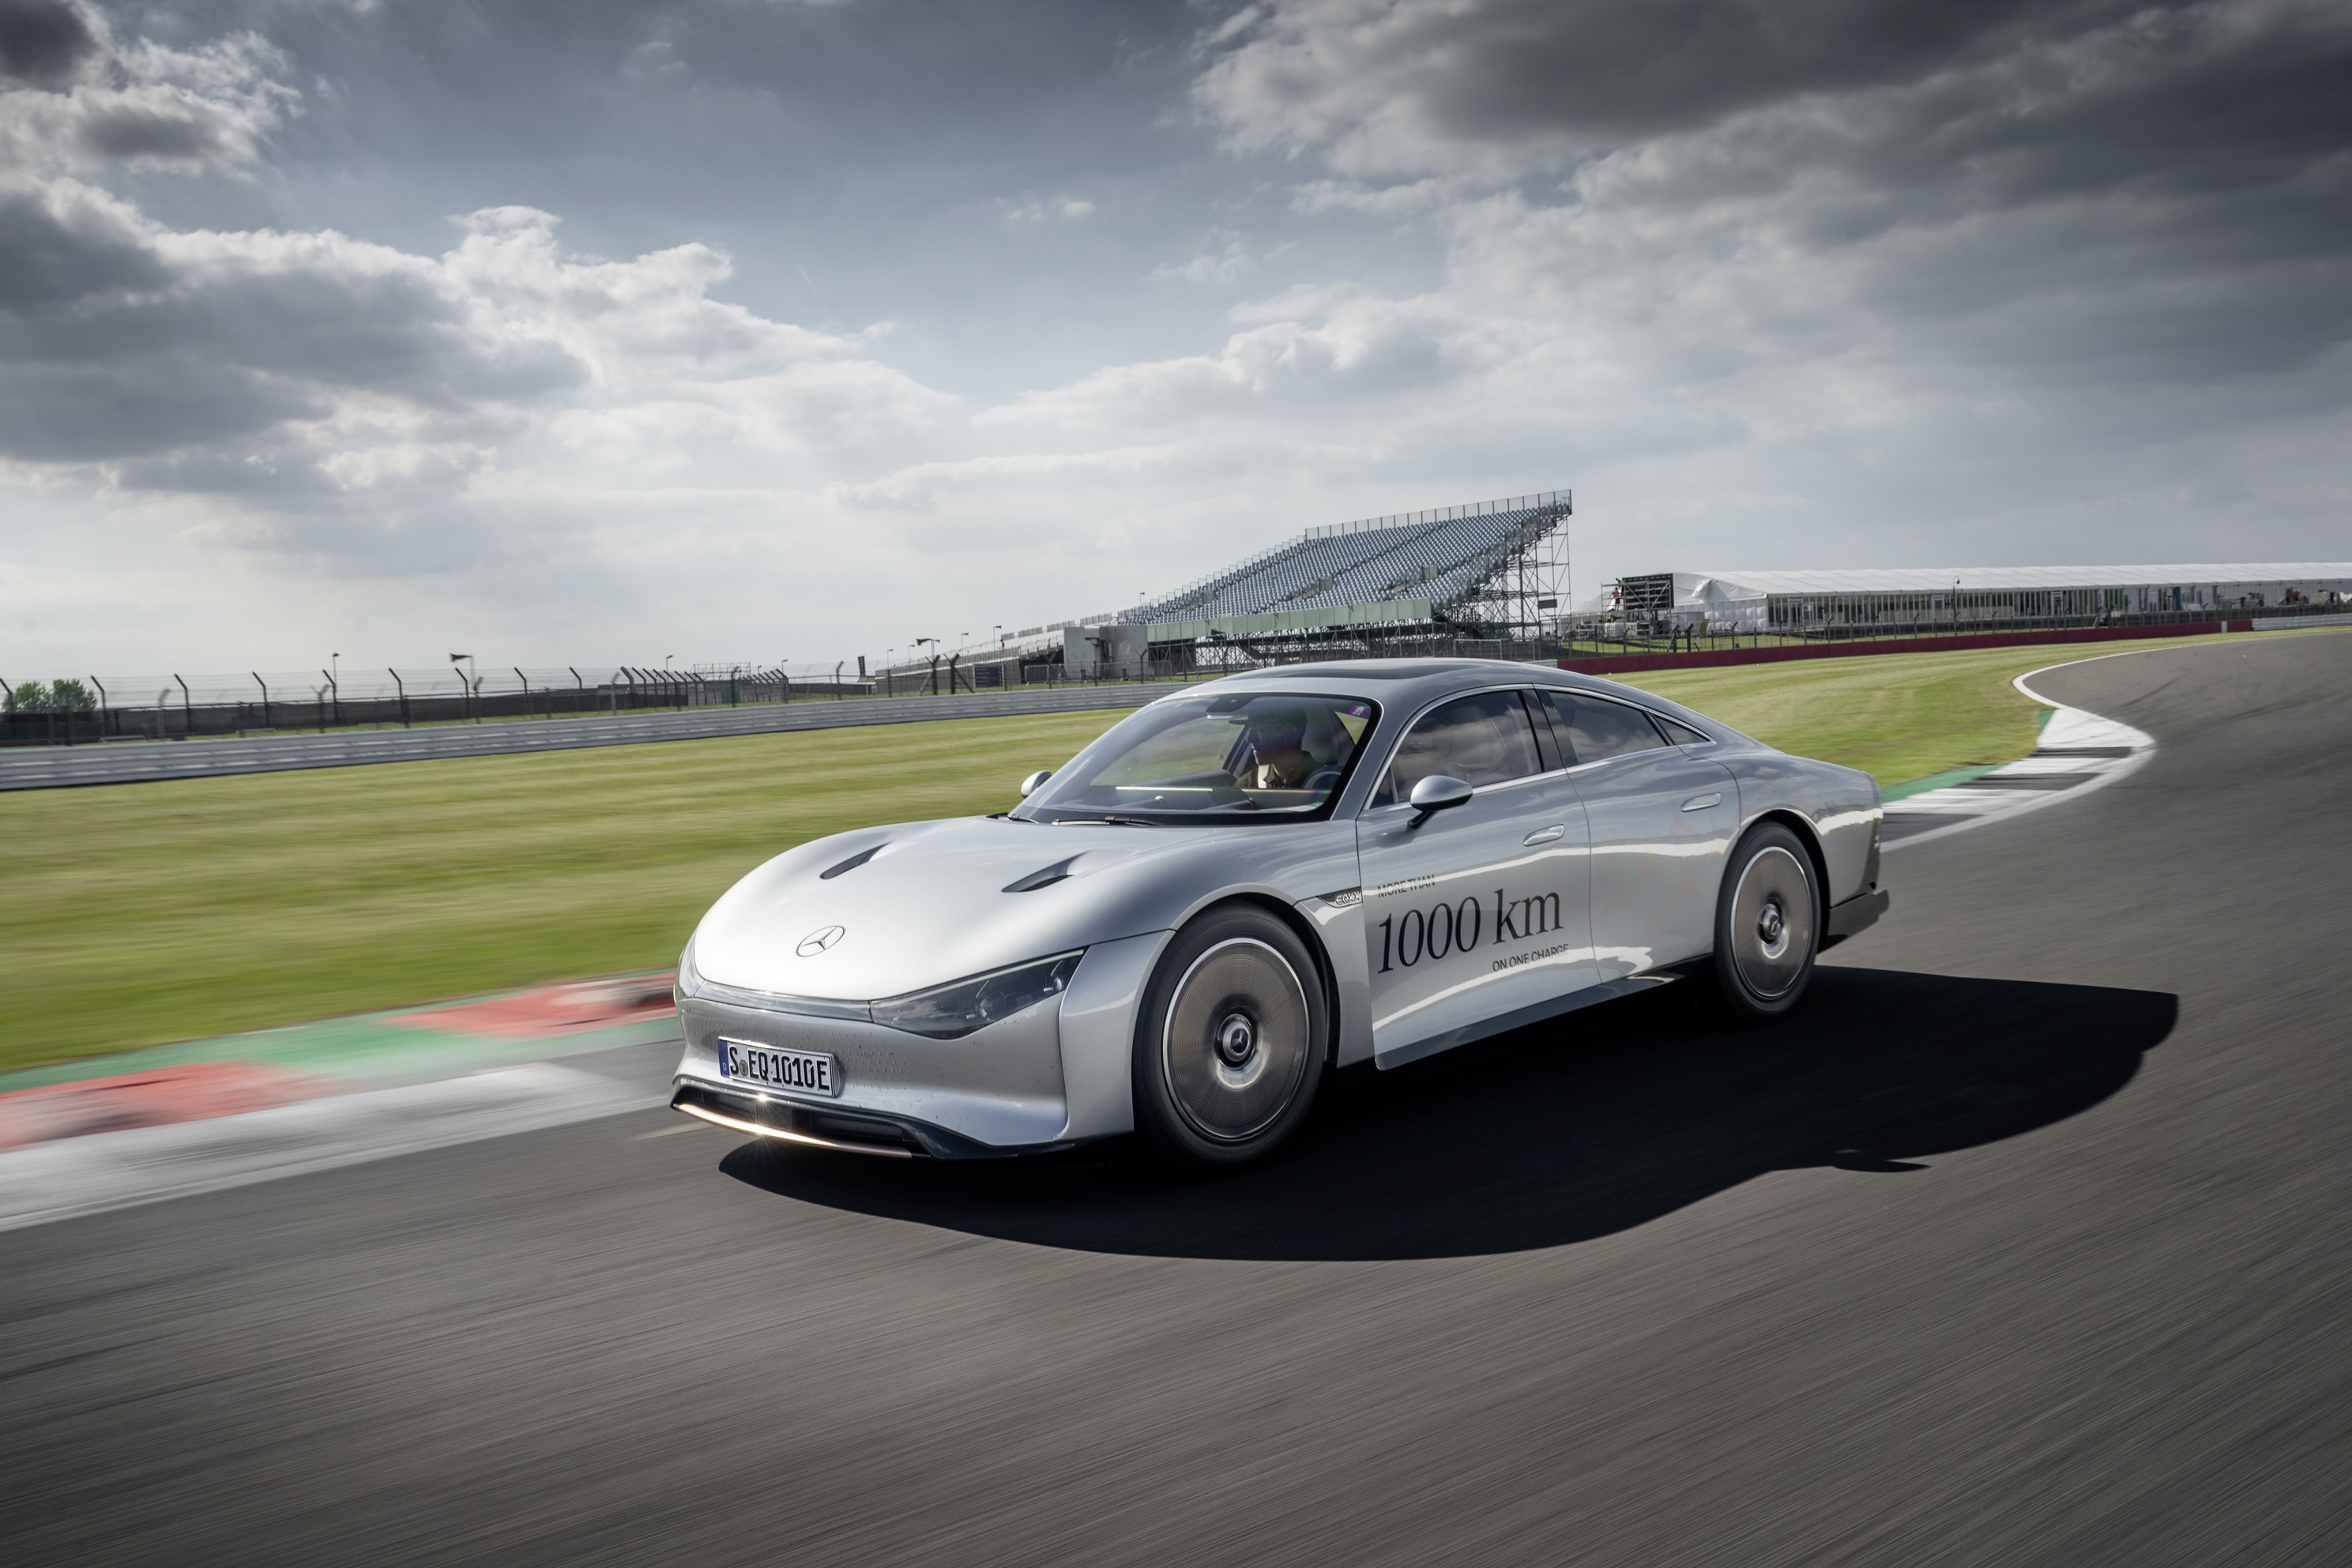 The silver Mercedes-Benz Vision EQXX Concept running laps on a racetrack